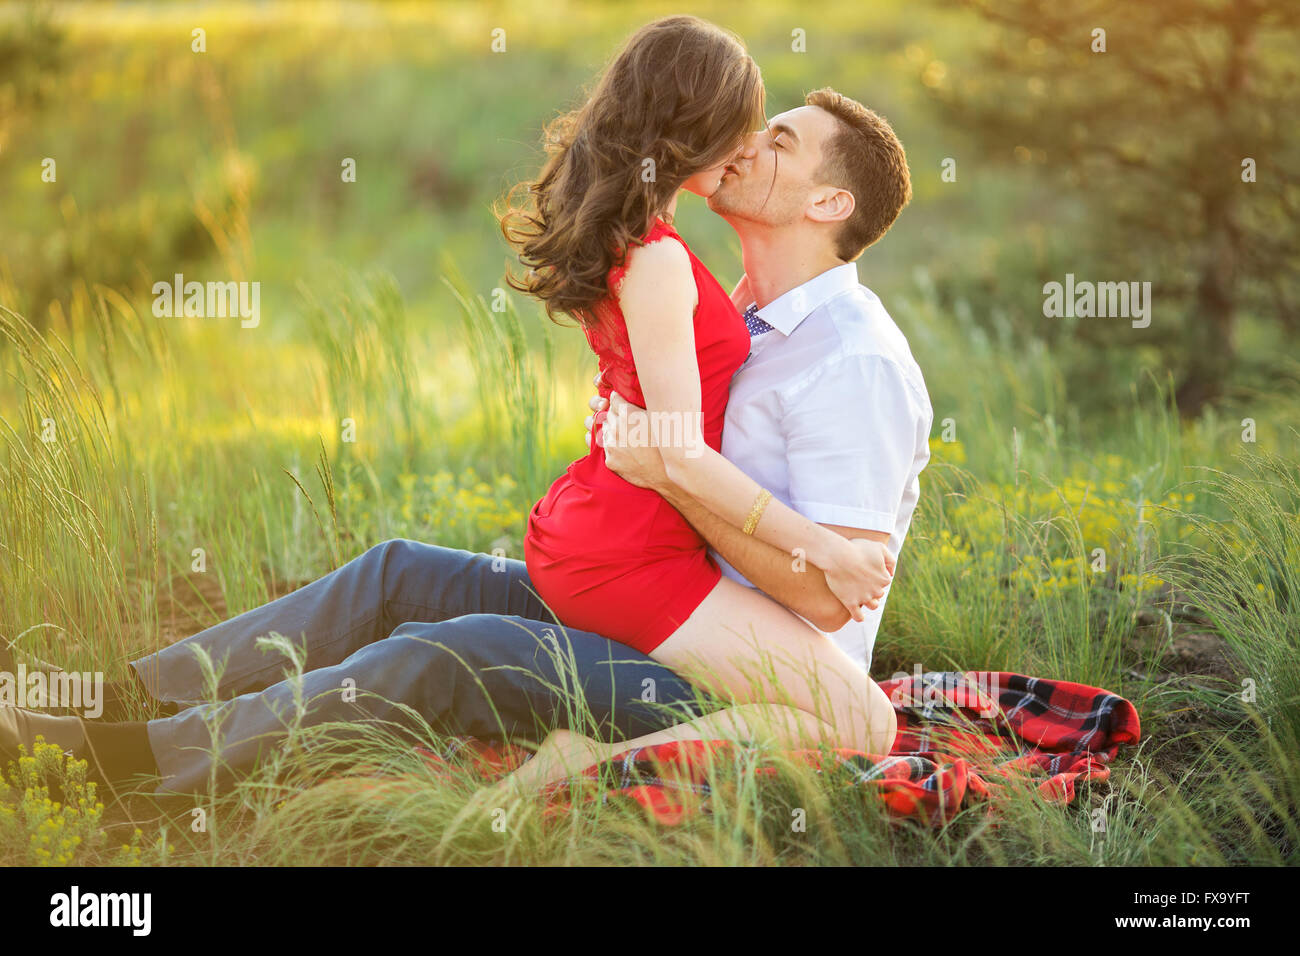 Hot Young Couple Kissing In Park Stock Photo 102252076 Alamy